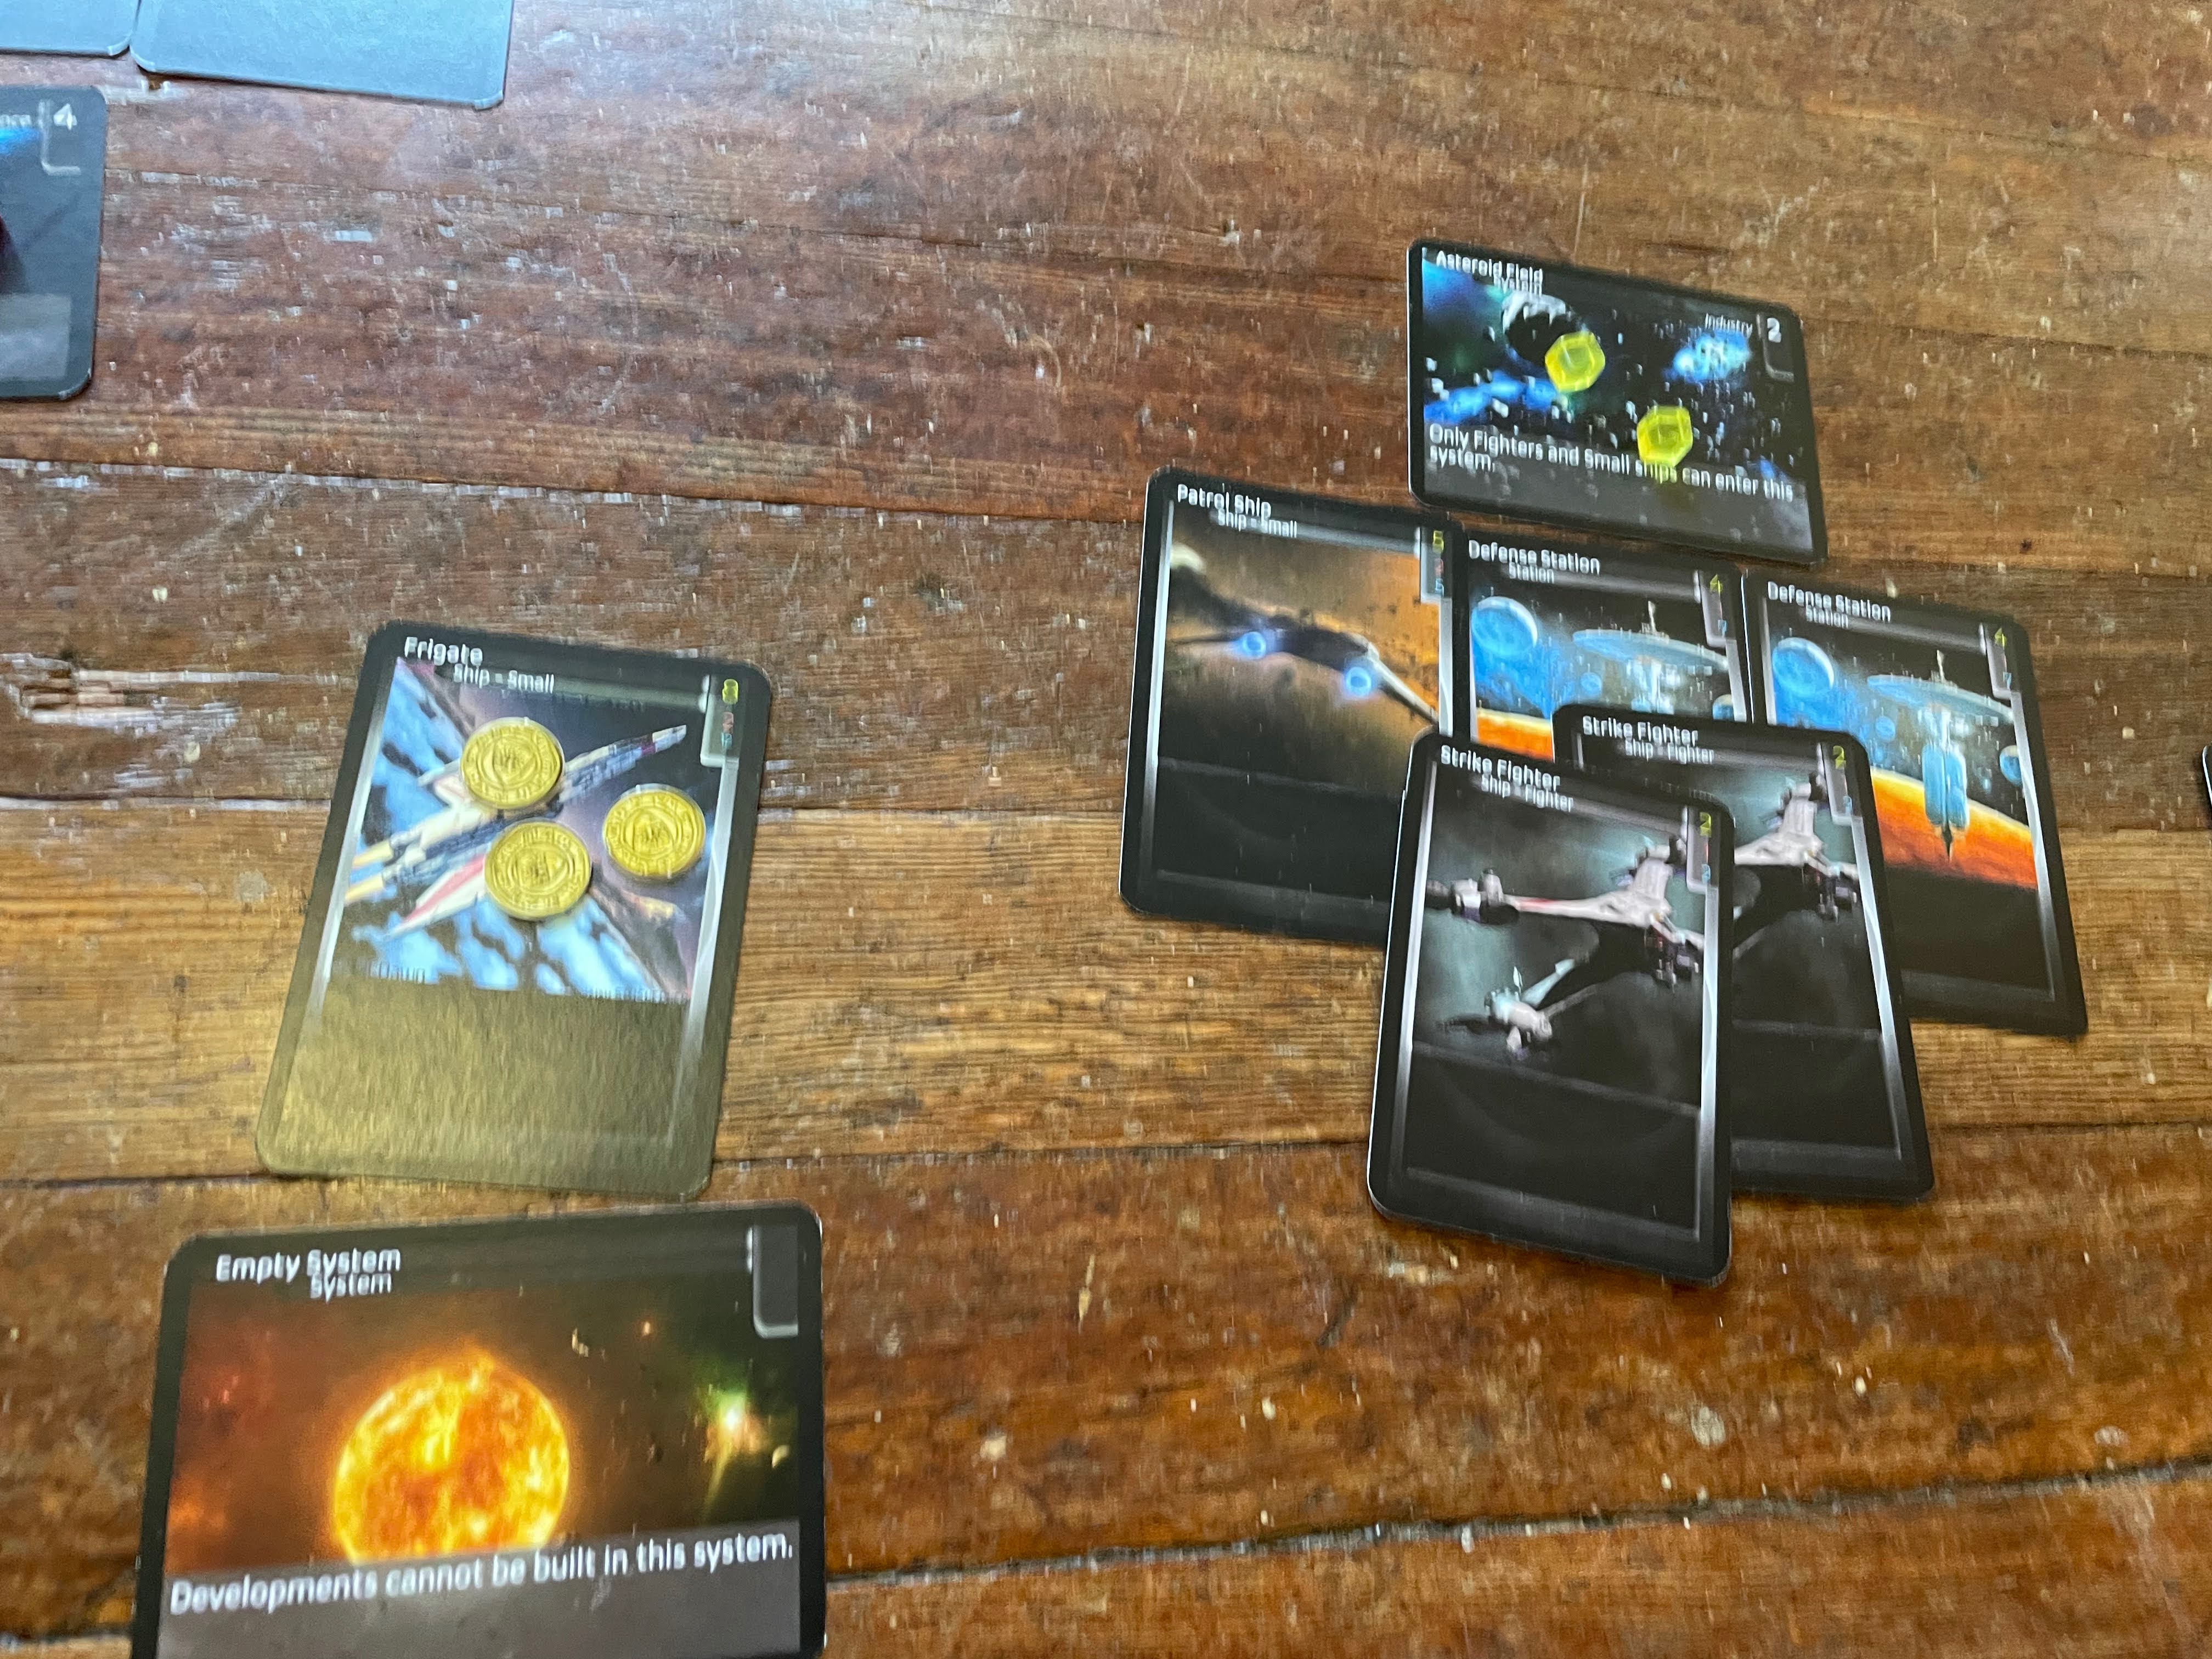 The Asteroid Field, with two Defense Stations, a Patrol ship, and two Fighters.